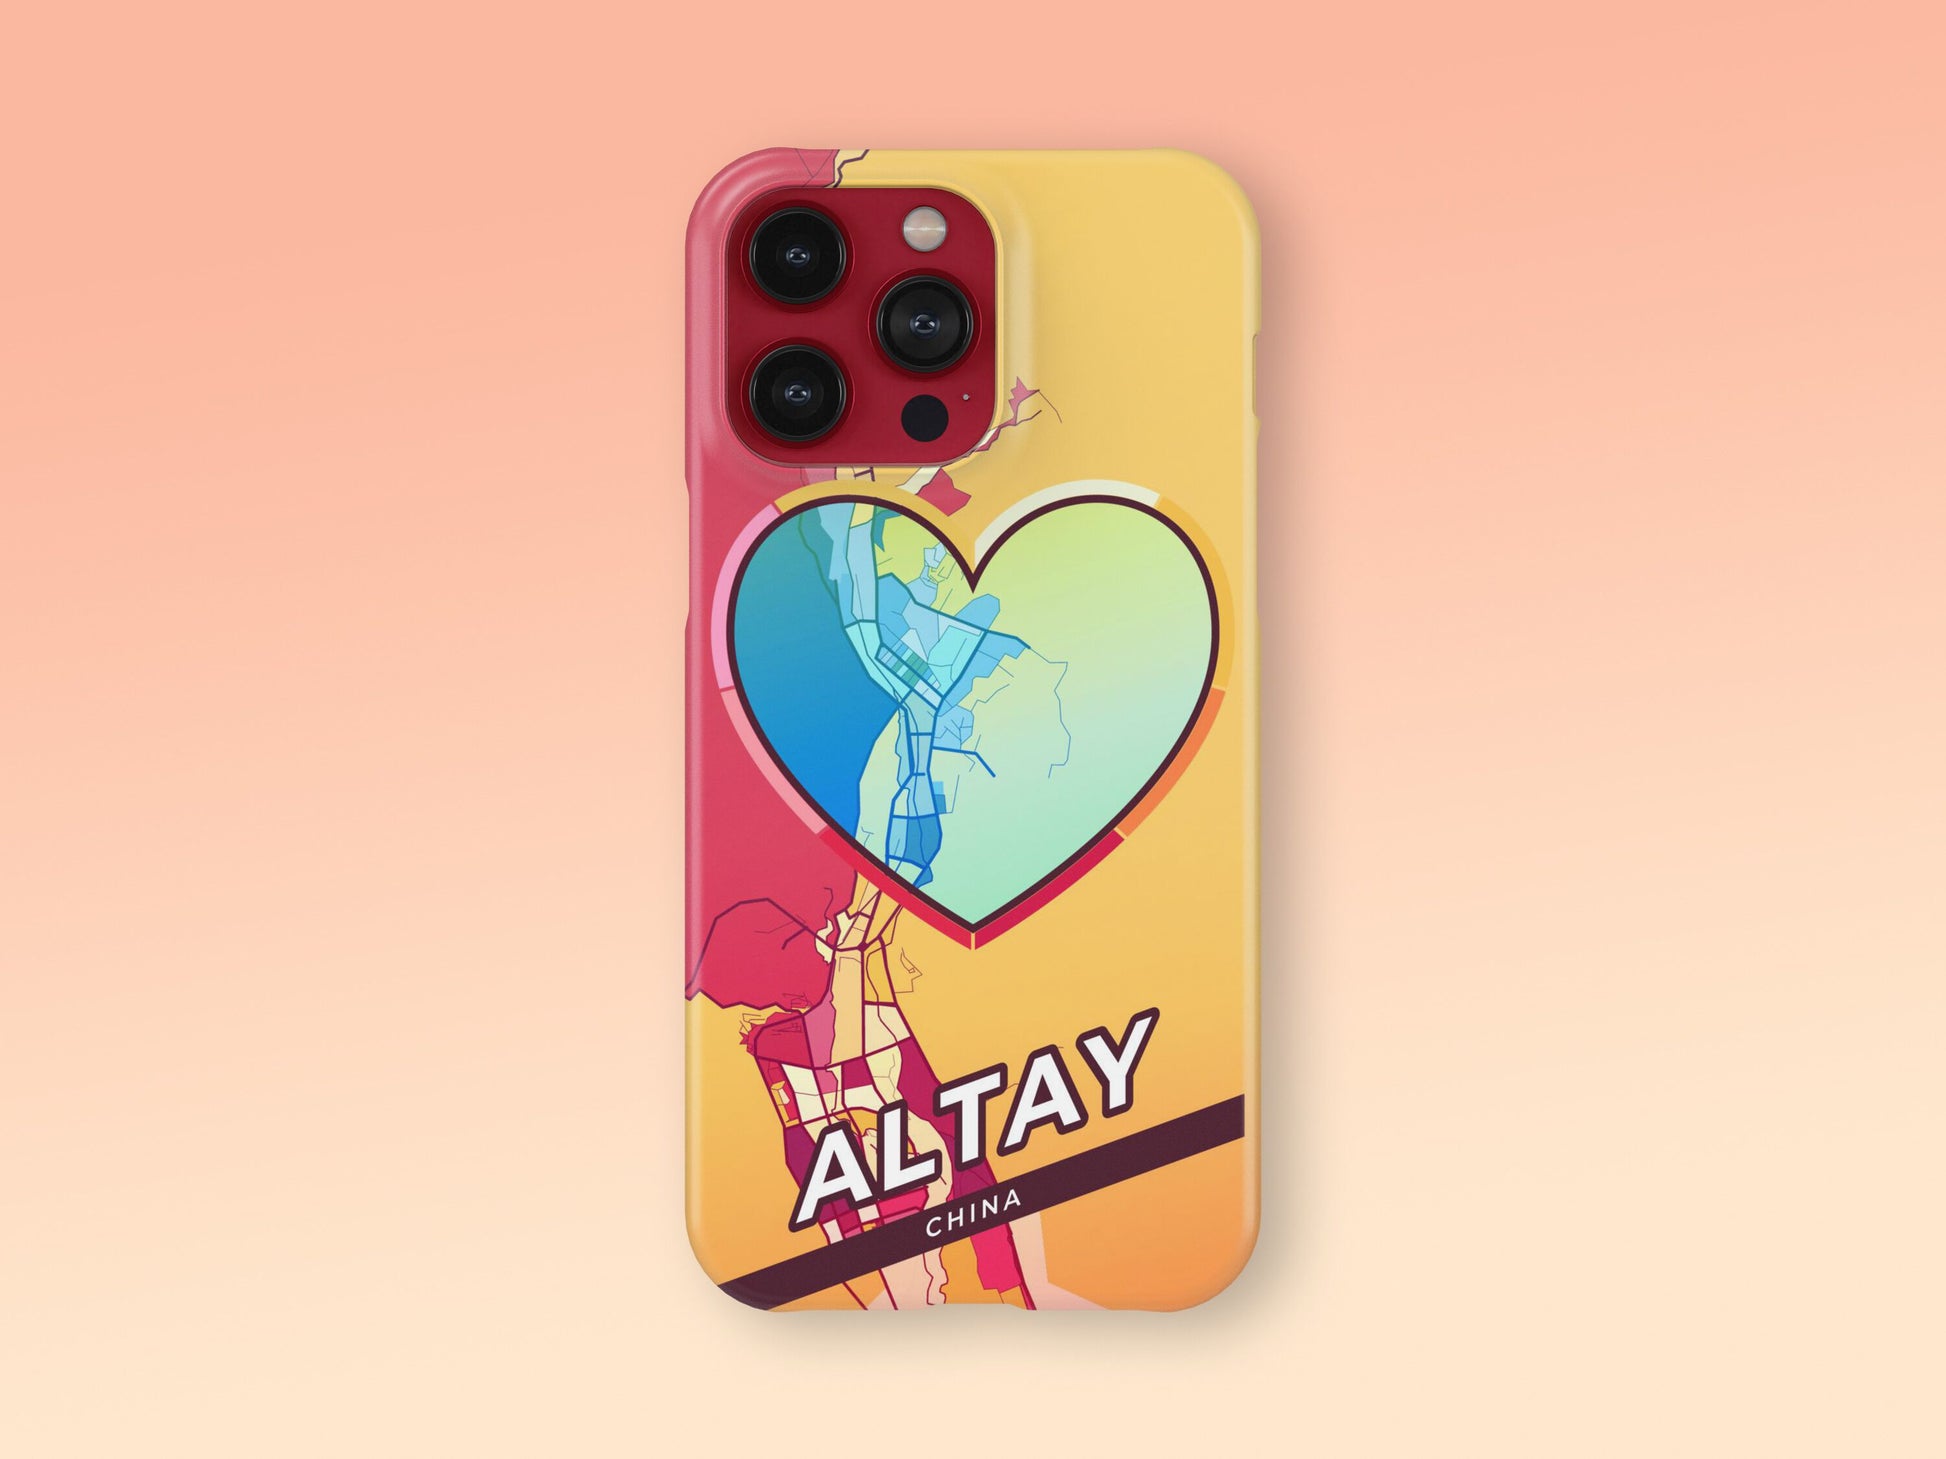 Altay China slim phone case with colorful icon. Birthday, wedding or housewarming gift. Couple match cases. 2